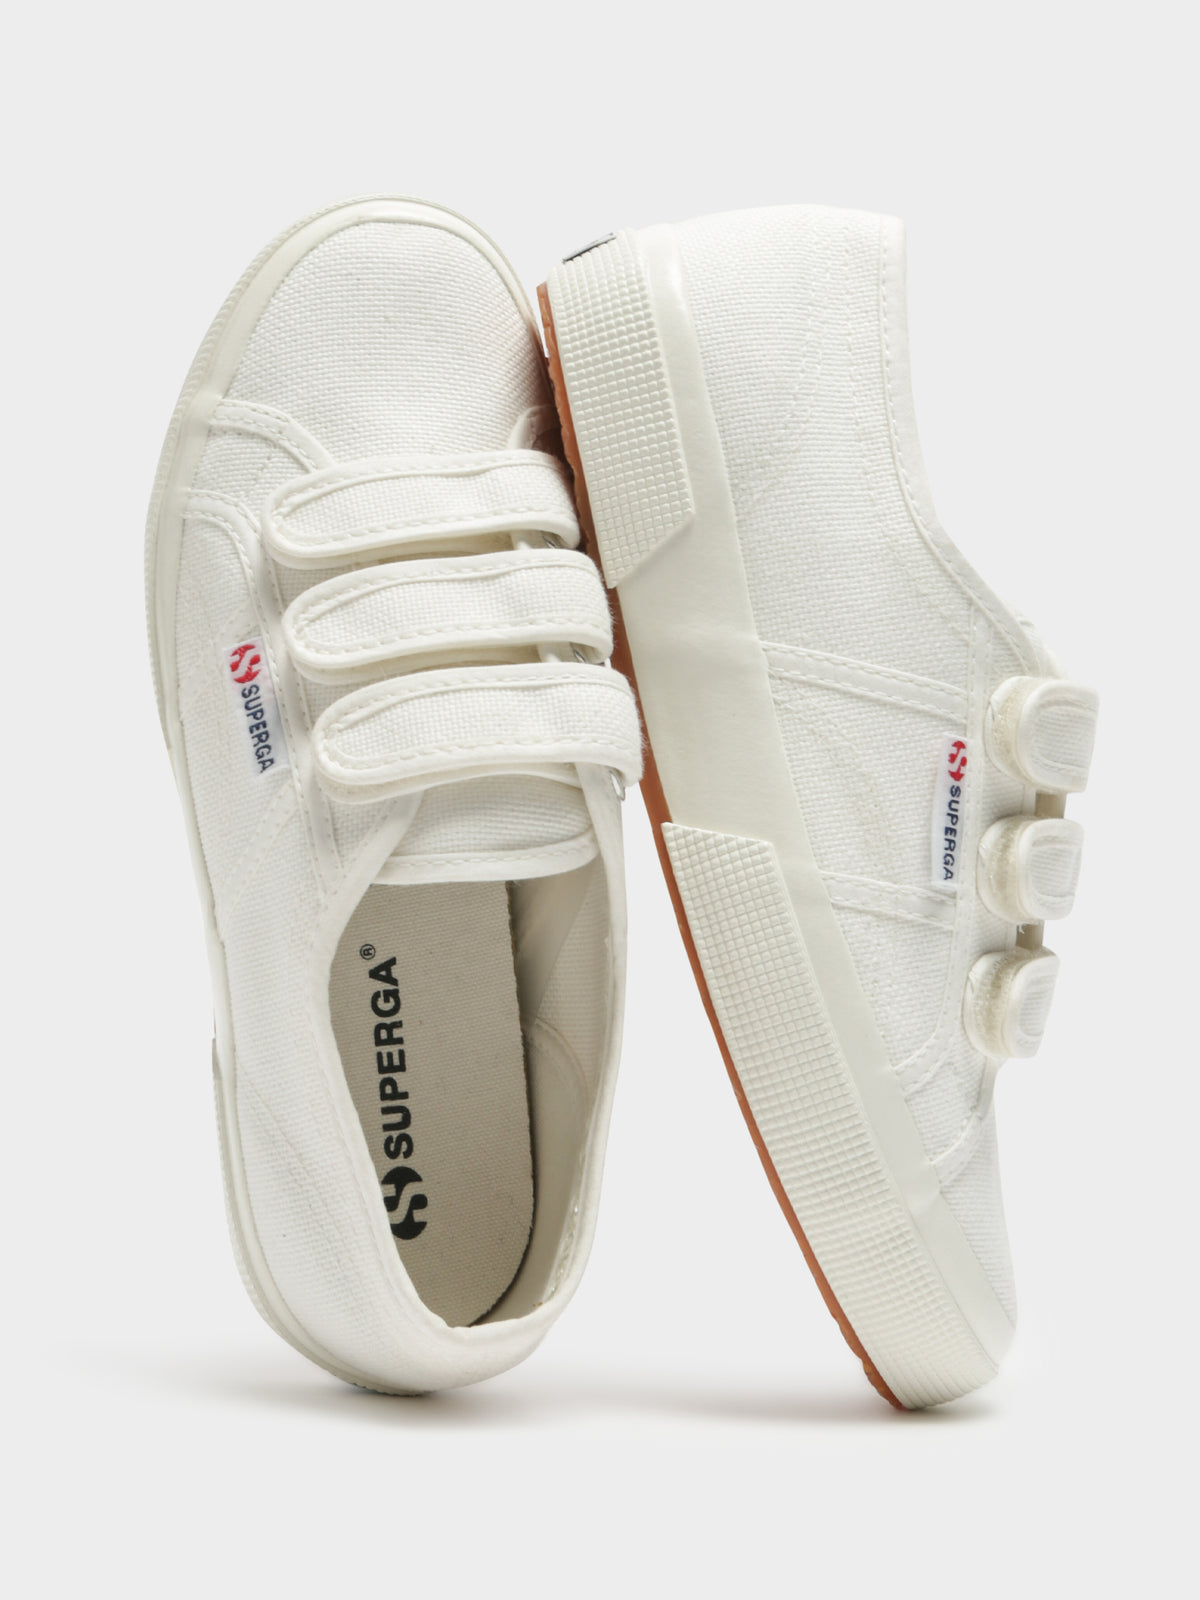 Unisex 2750 Strap Shiny Gum Sneakers in Off White